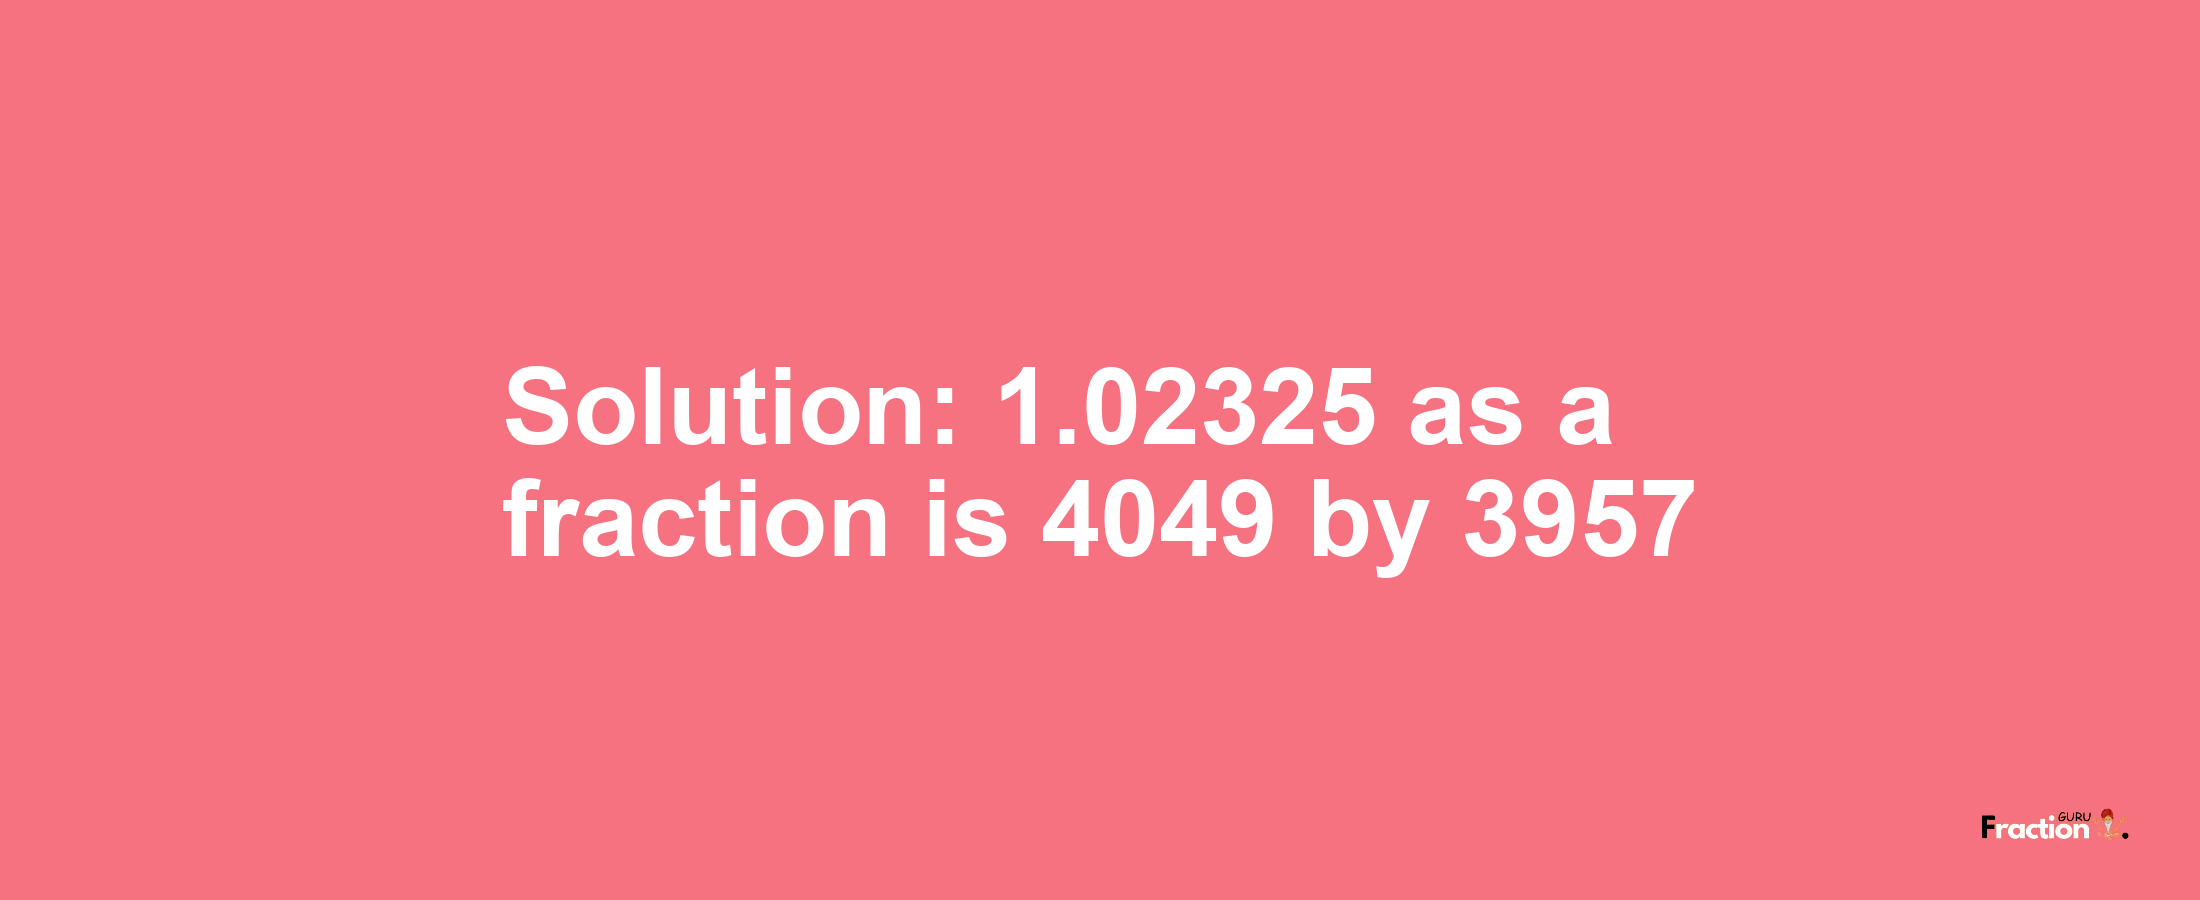 Solution:1.02325 as a fraction is 4049/3957